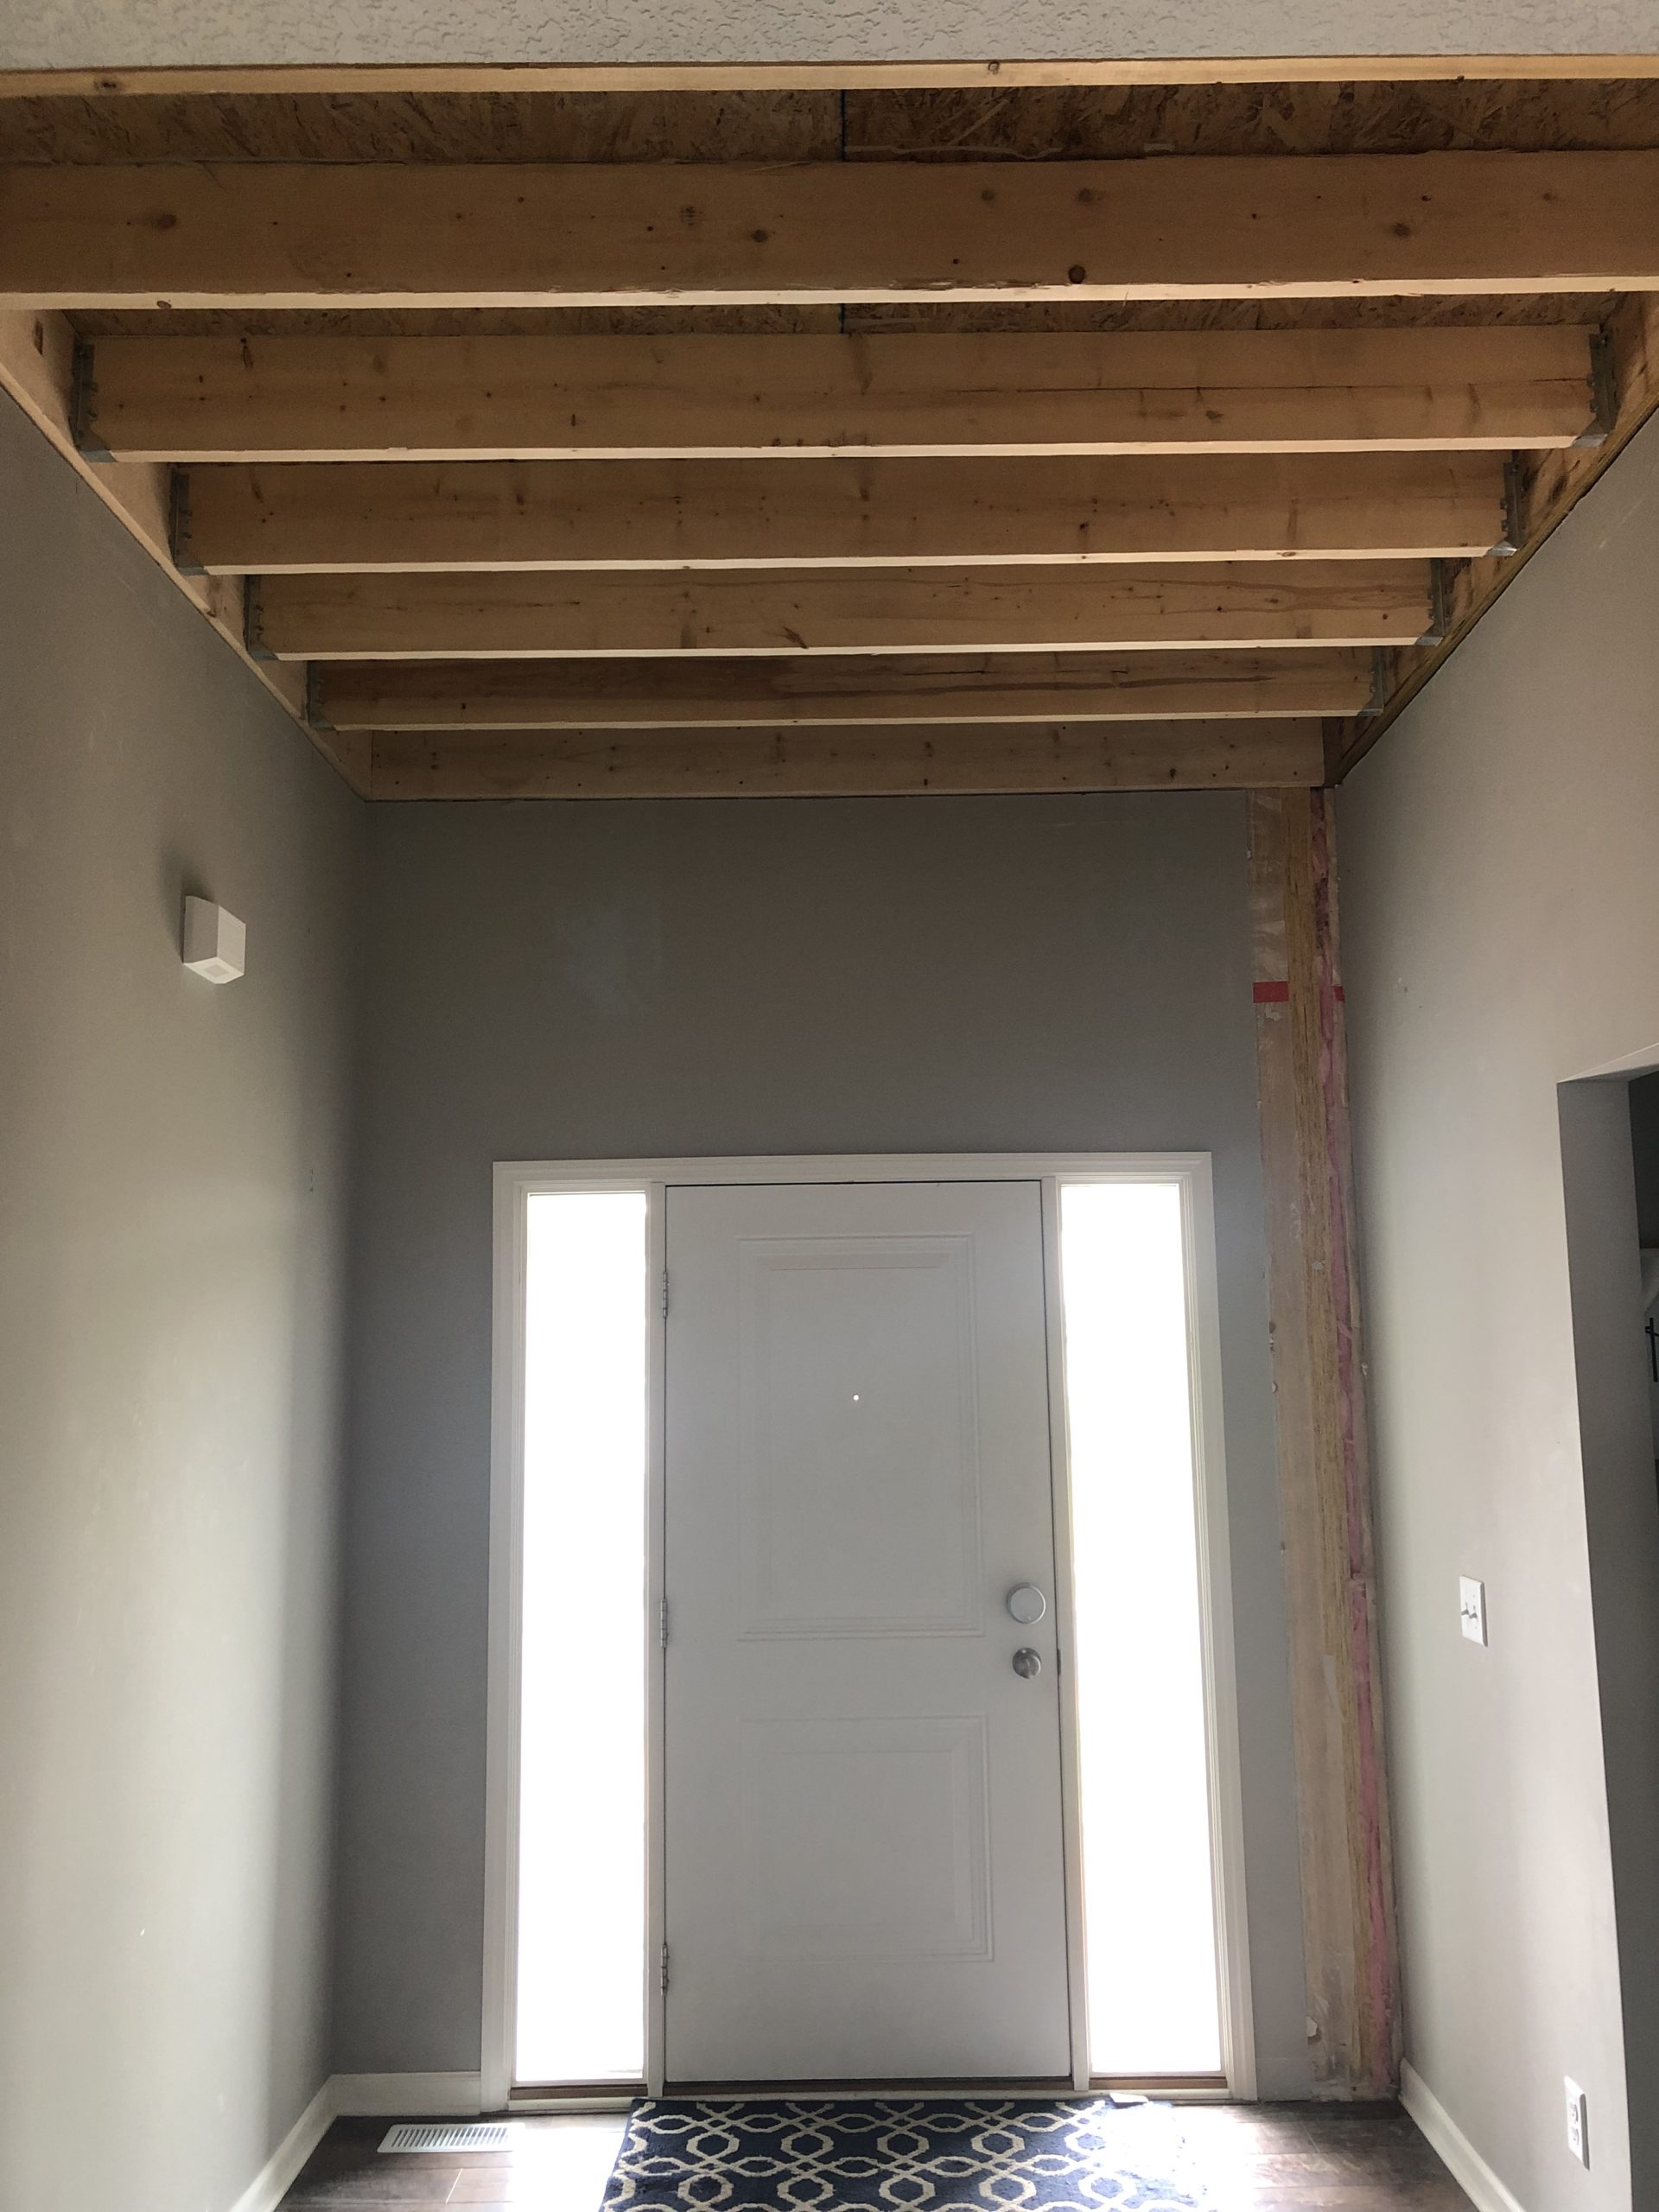 The Trista | The Entryway - Under Construction